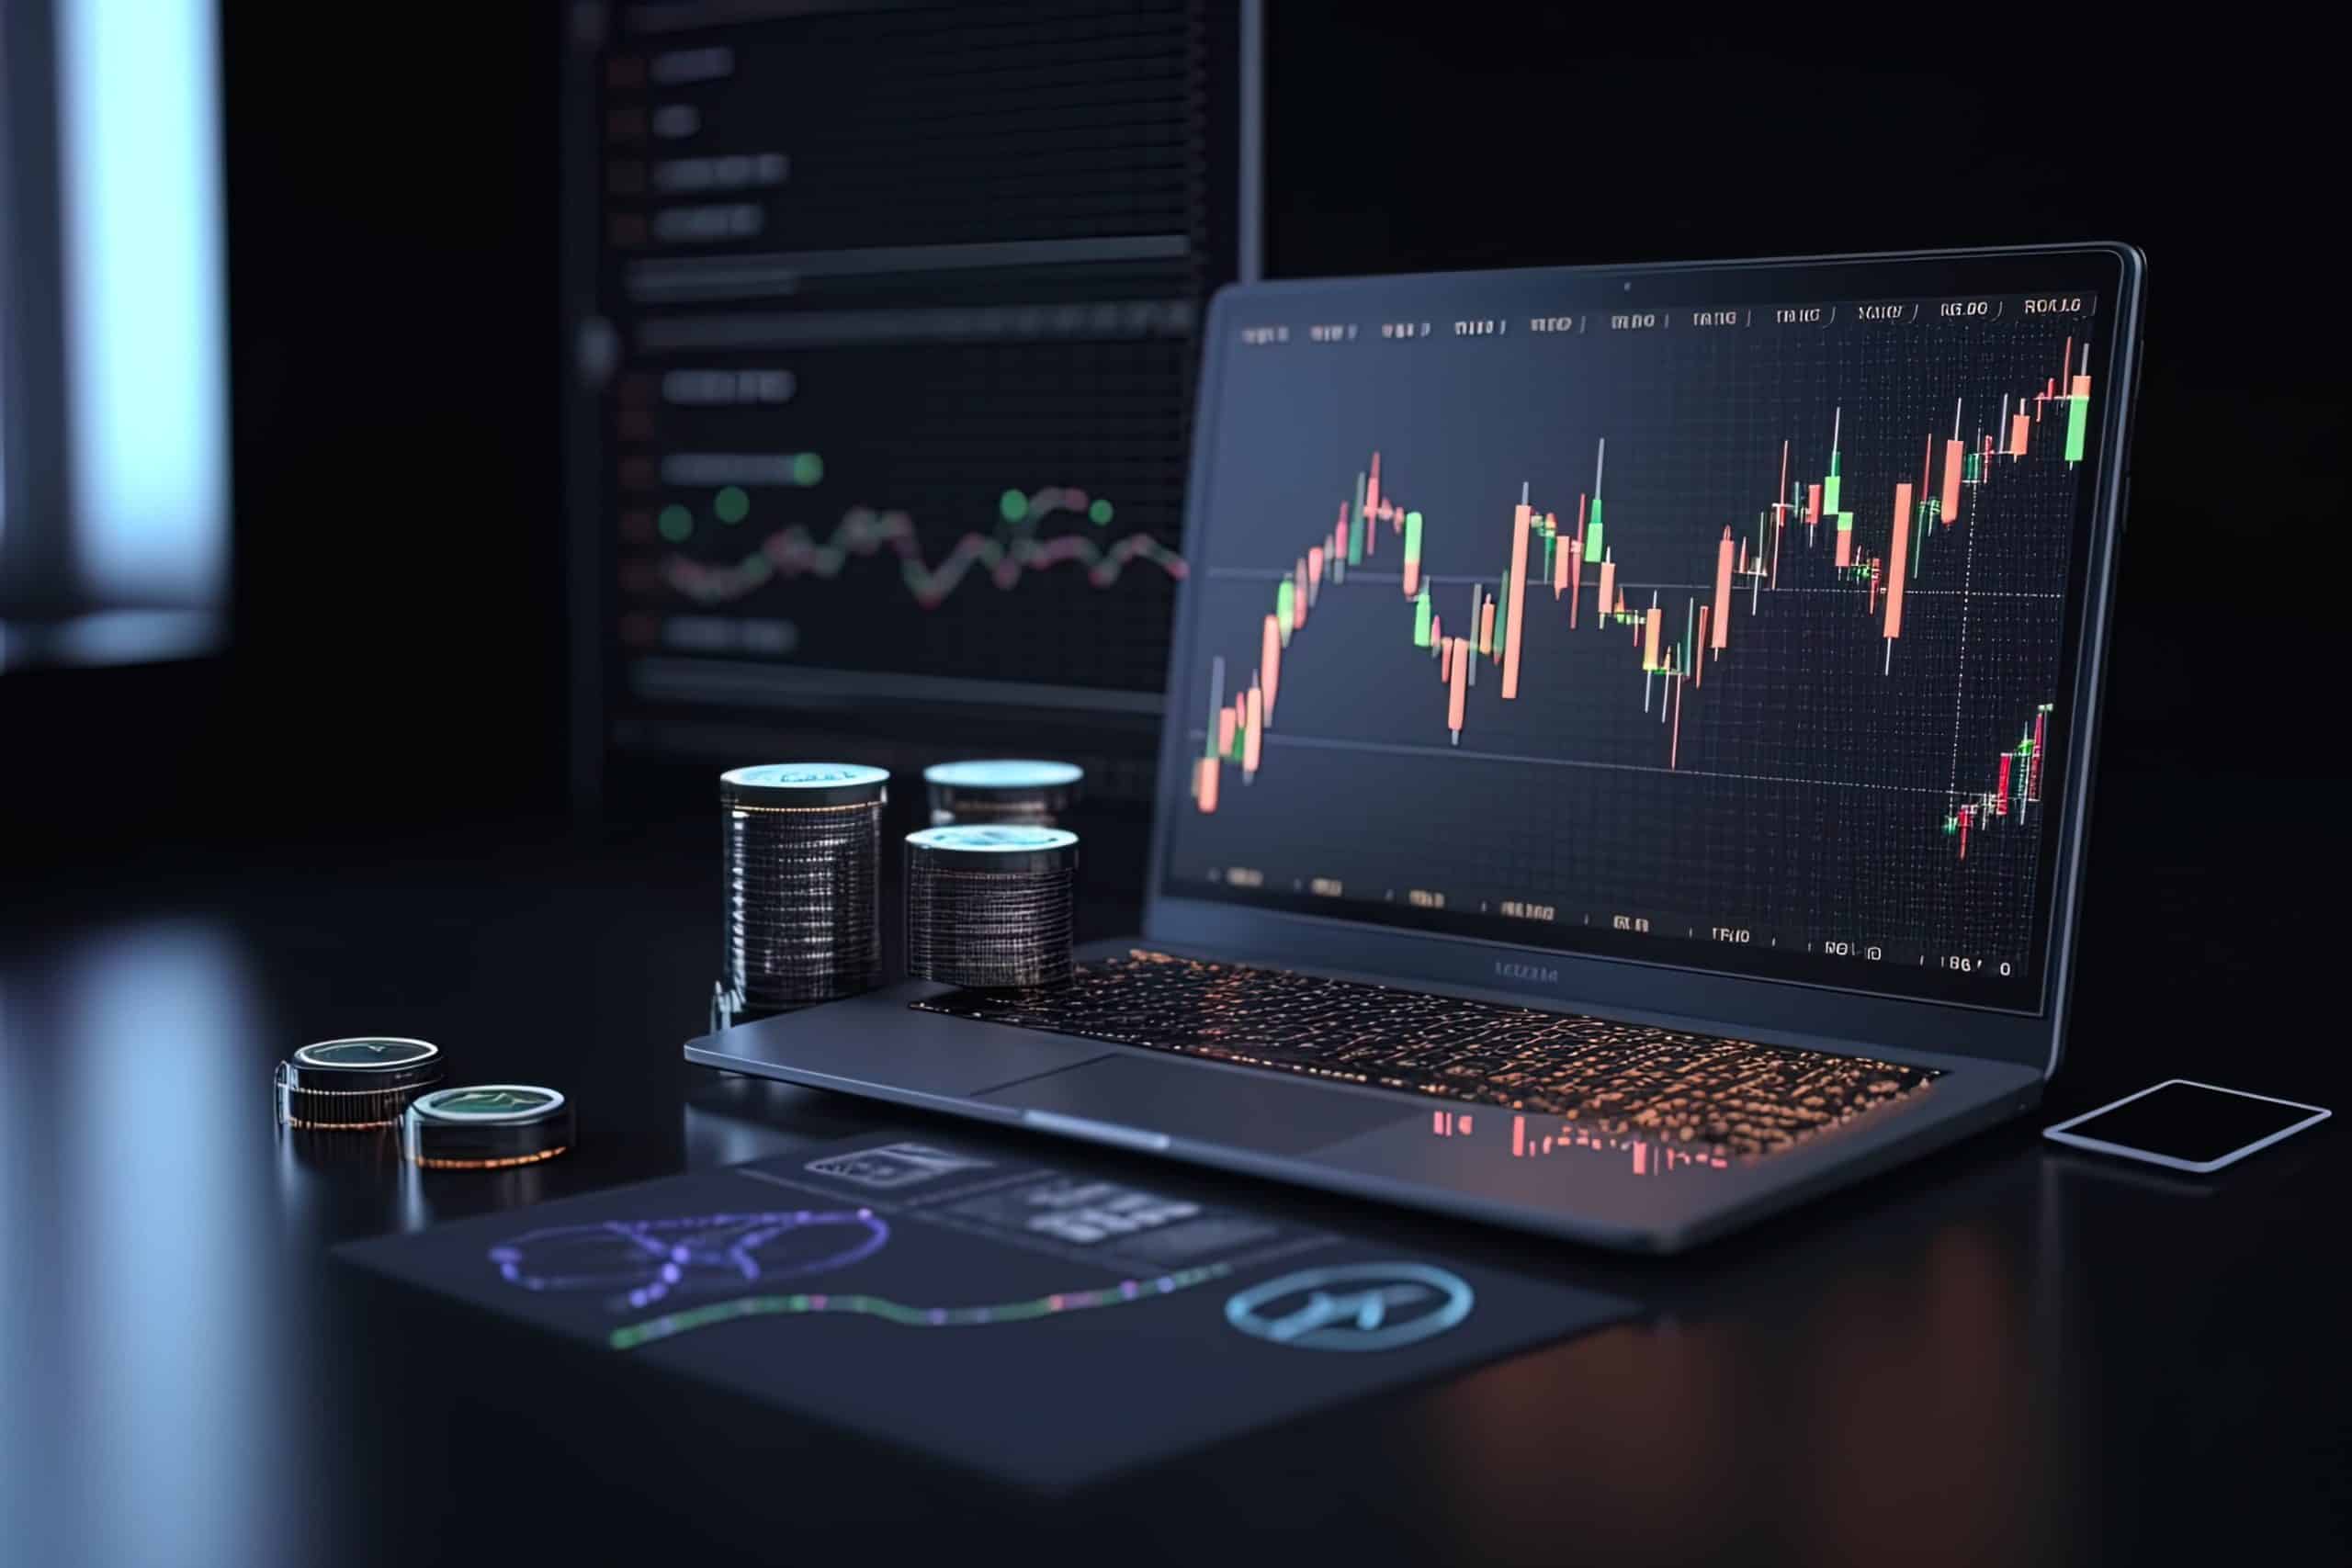 Market Watchers Are Focusing on This Under-the-Radar AI Crypto Signals Platform – Here’s Why